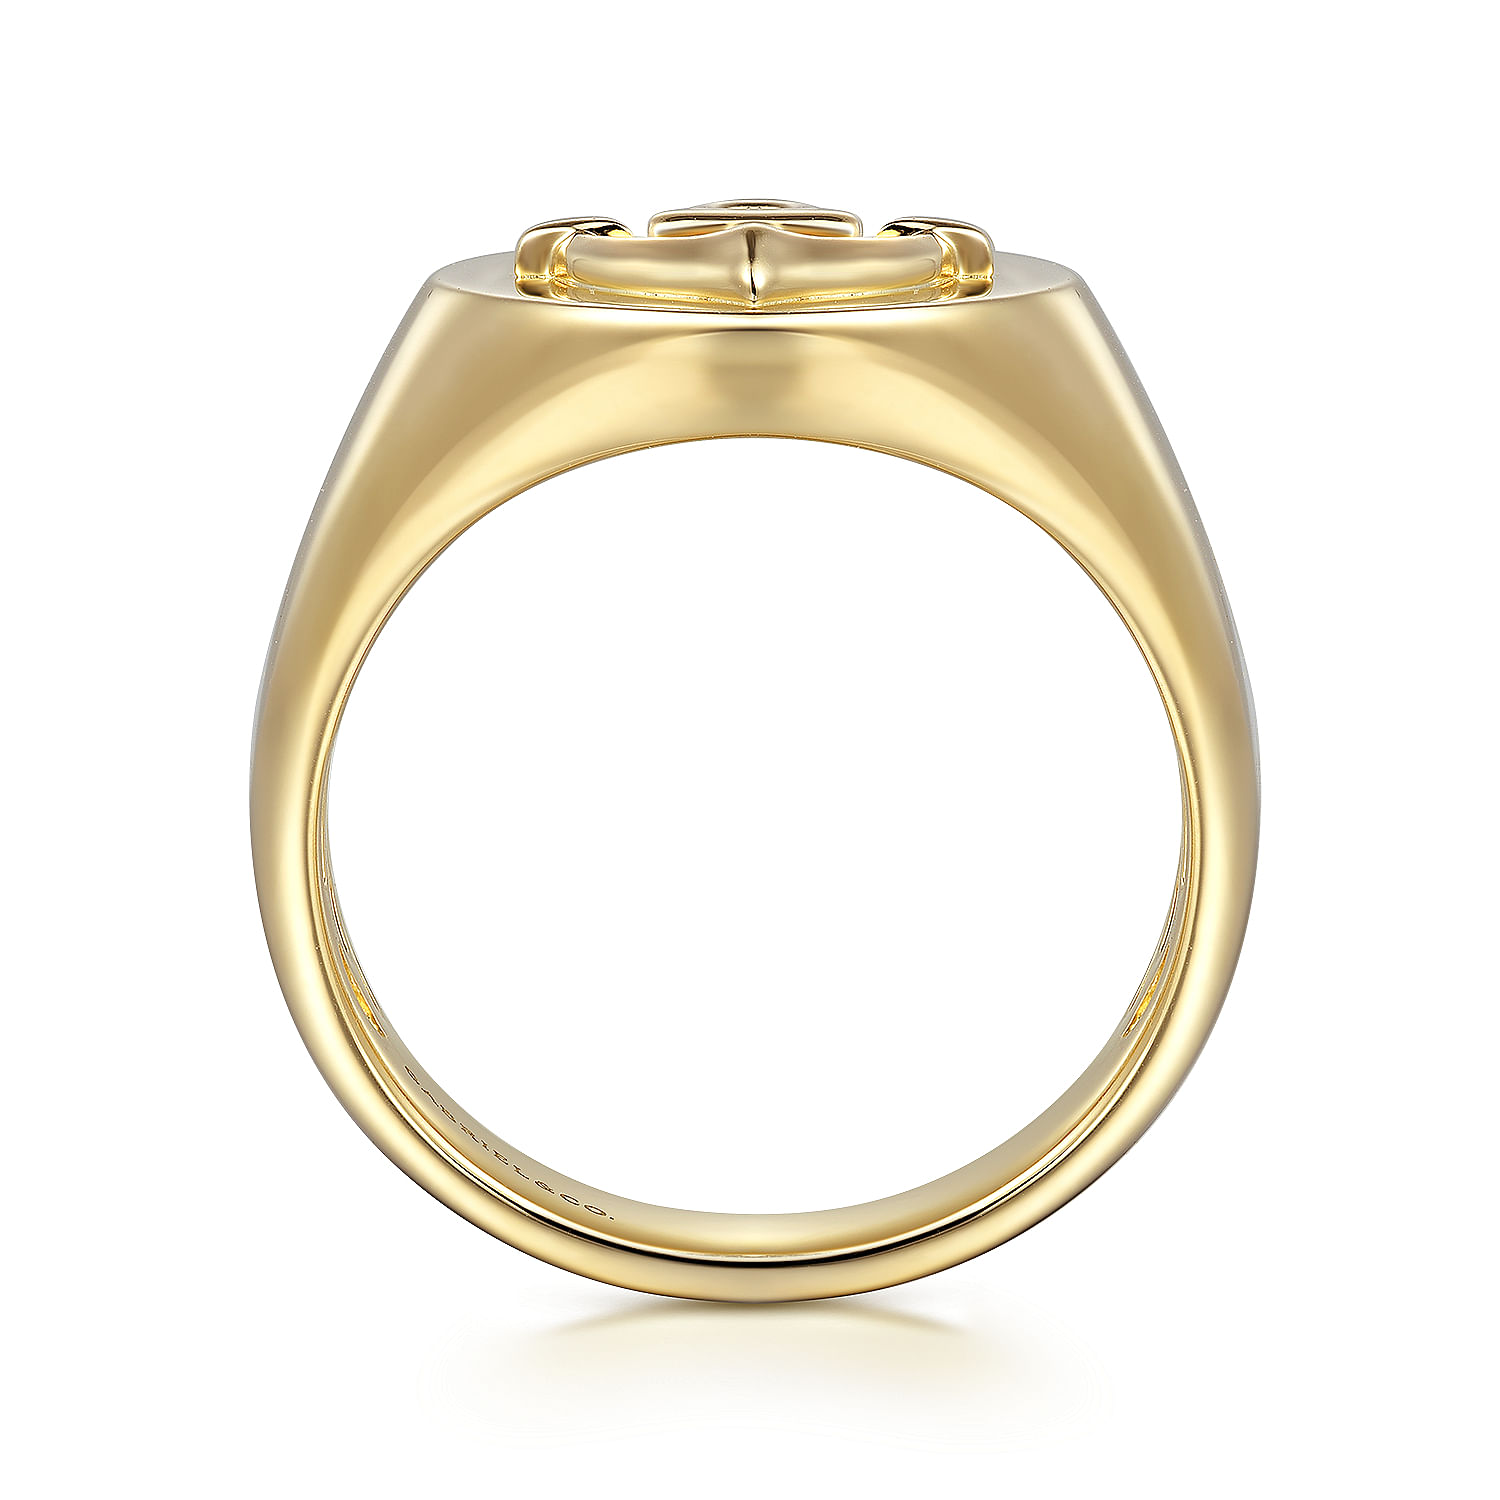 14K Yellow Gold Signet  Mens Ring in High Polished Finish